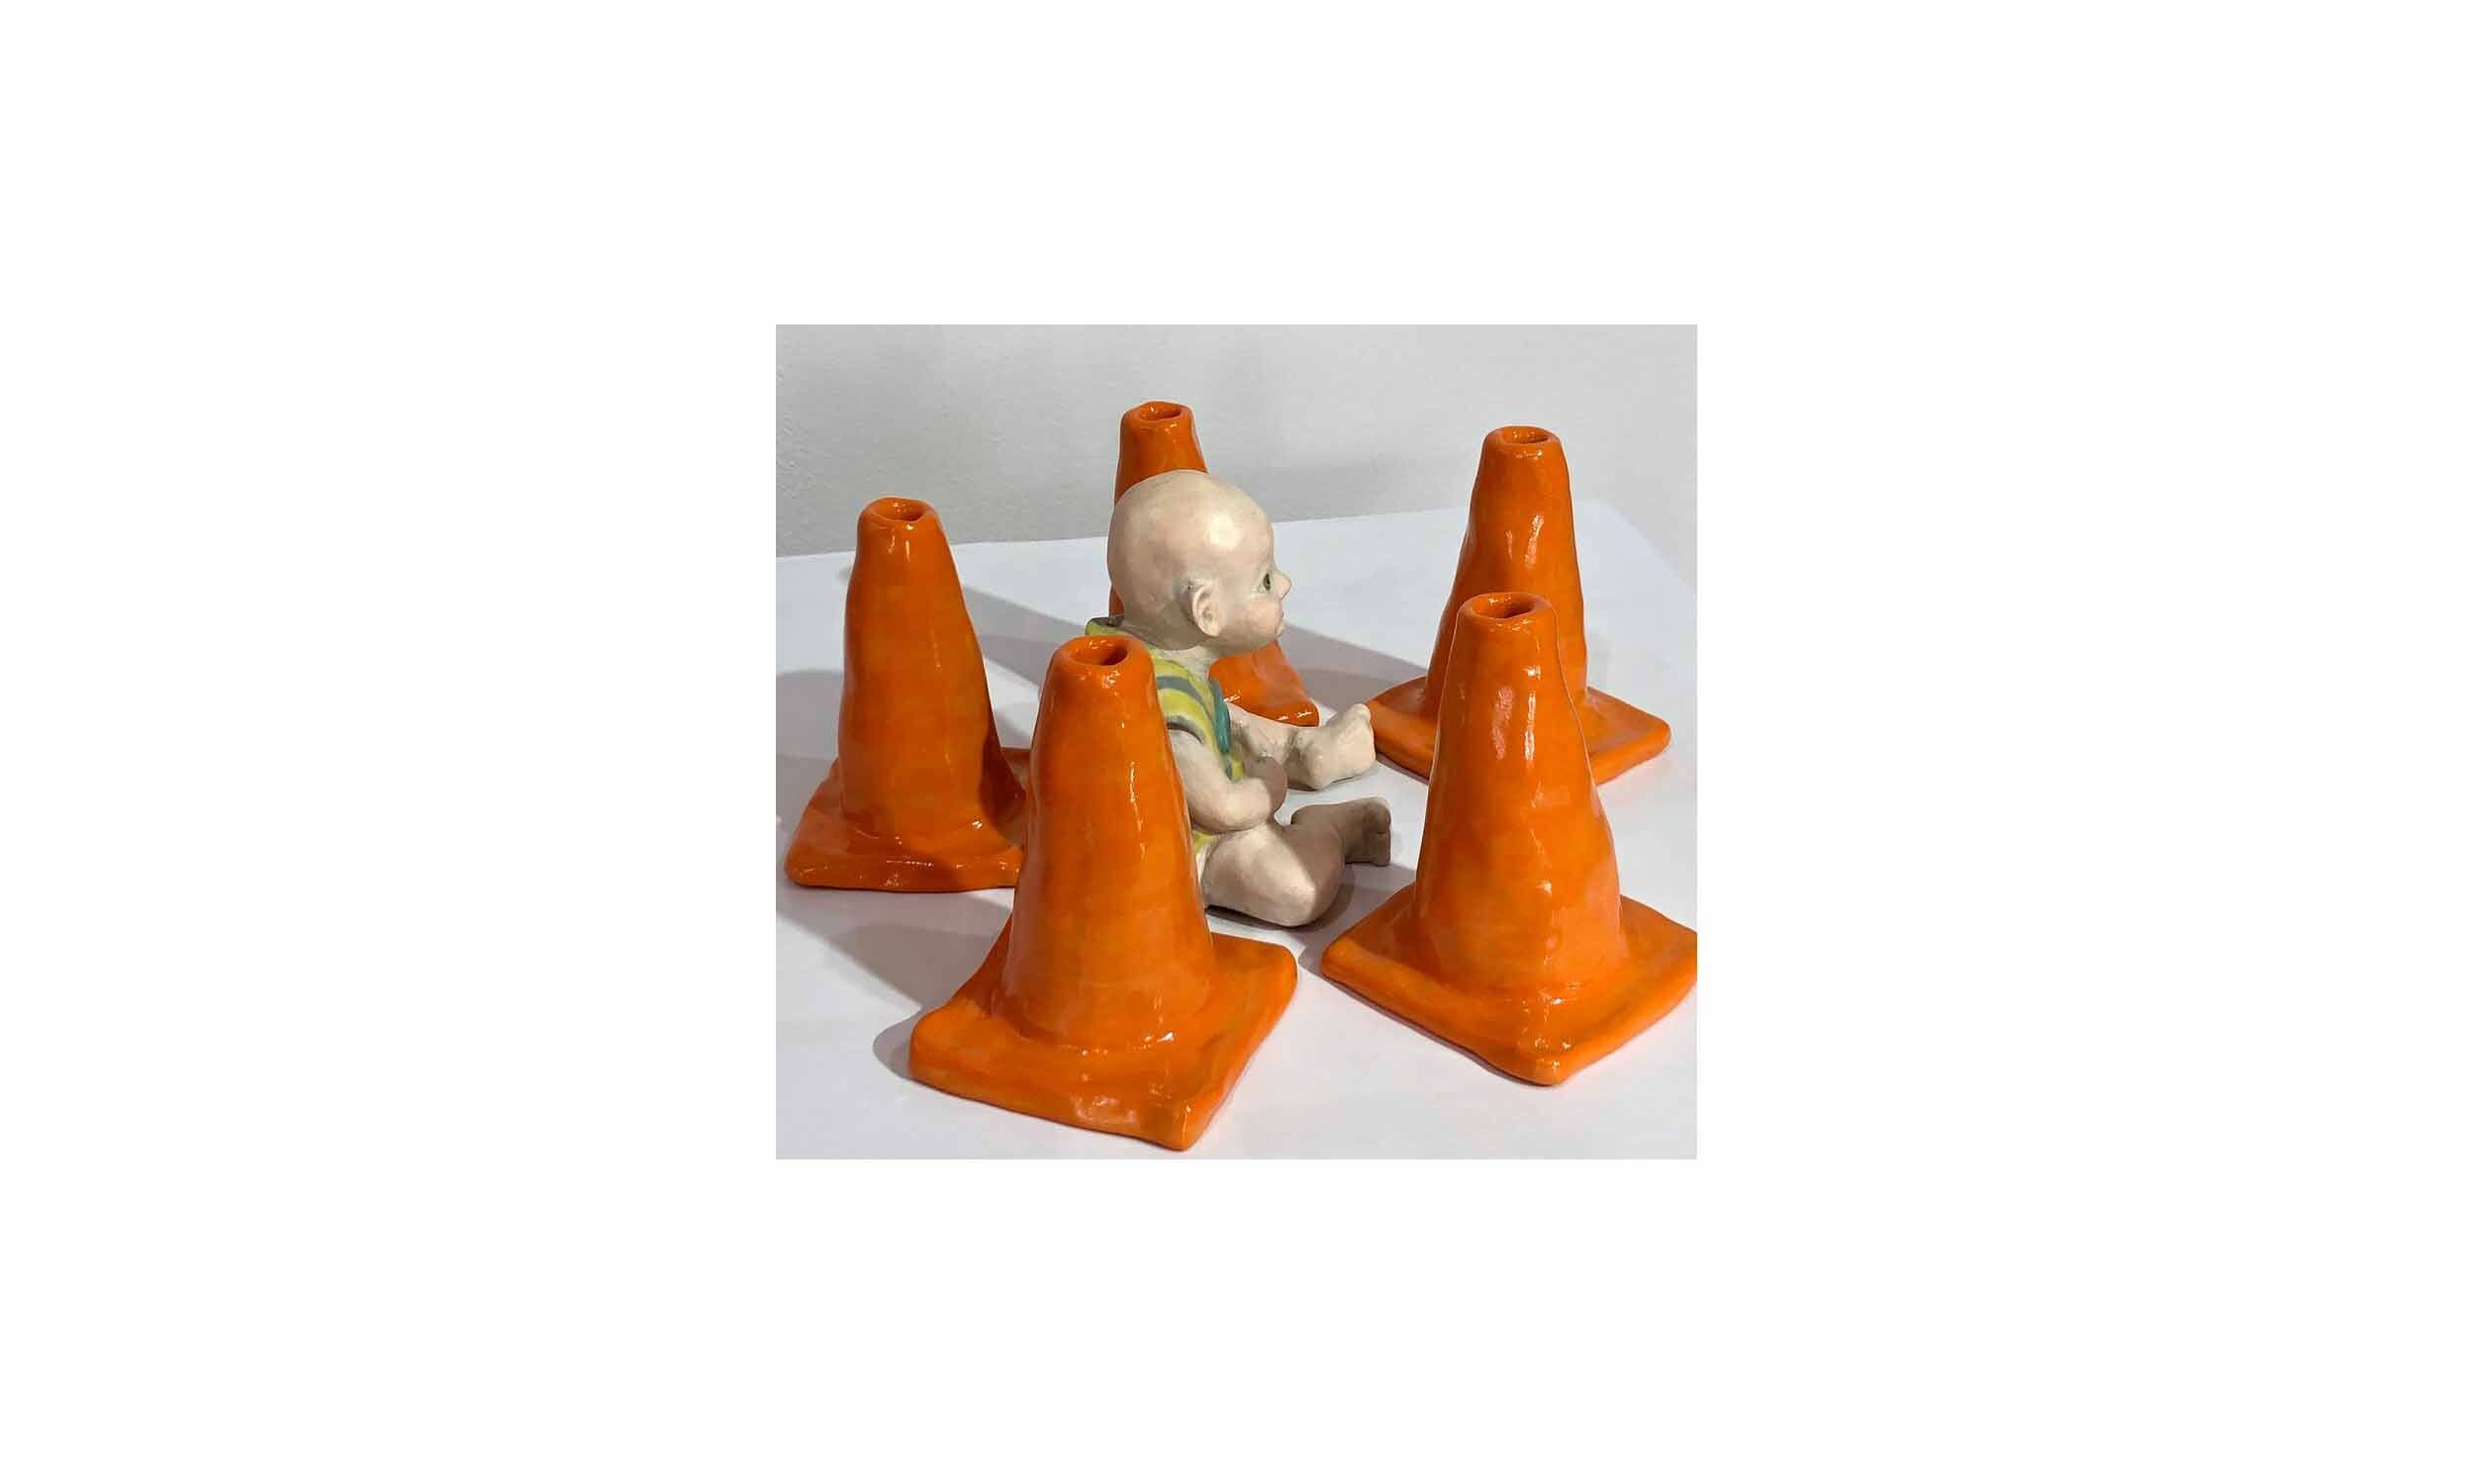 Cones-of-Safety-5#3.jpg